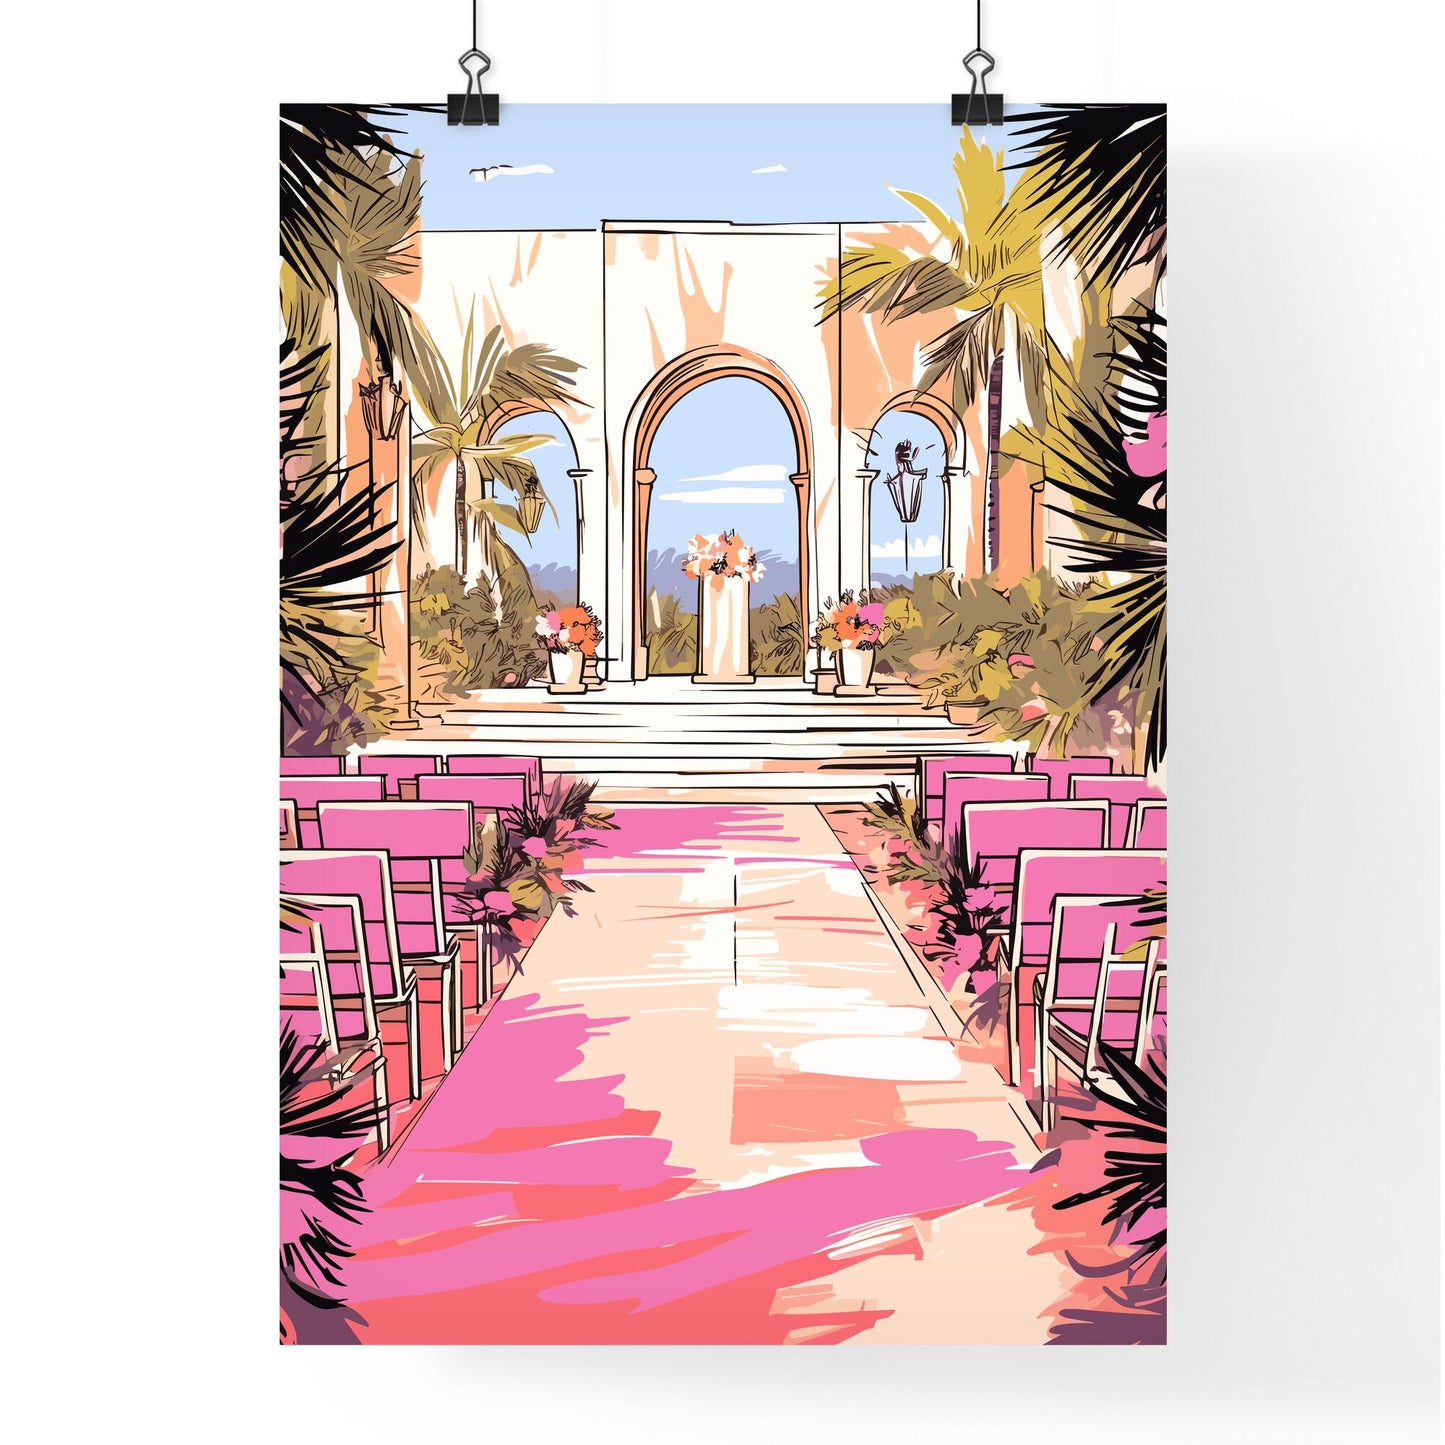 Wedding Setting Where The Ceremony Will Take Place - A Wedding Ceremony With Pink Chairs And Palm Trees Default Title